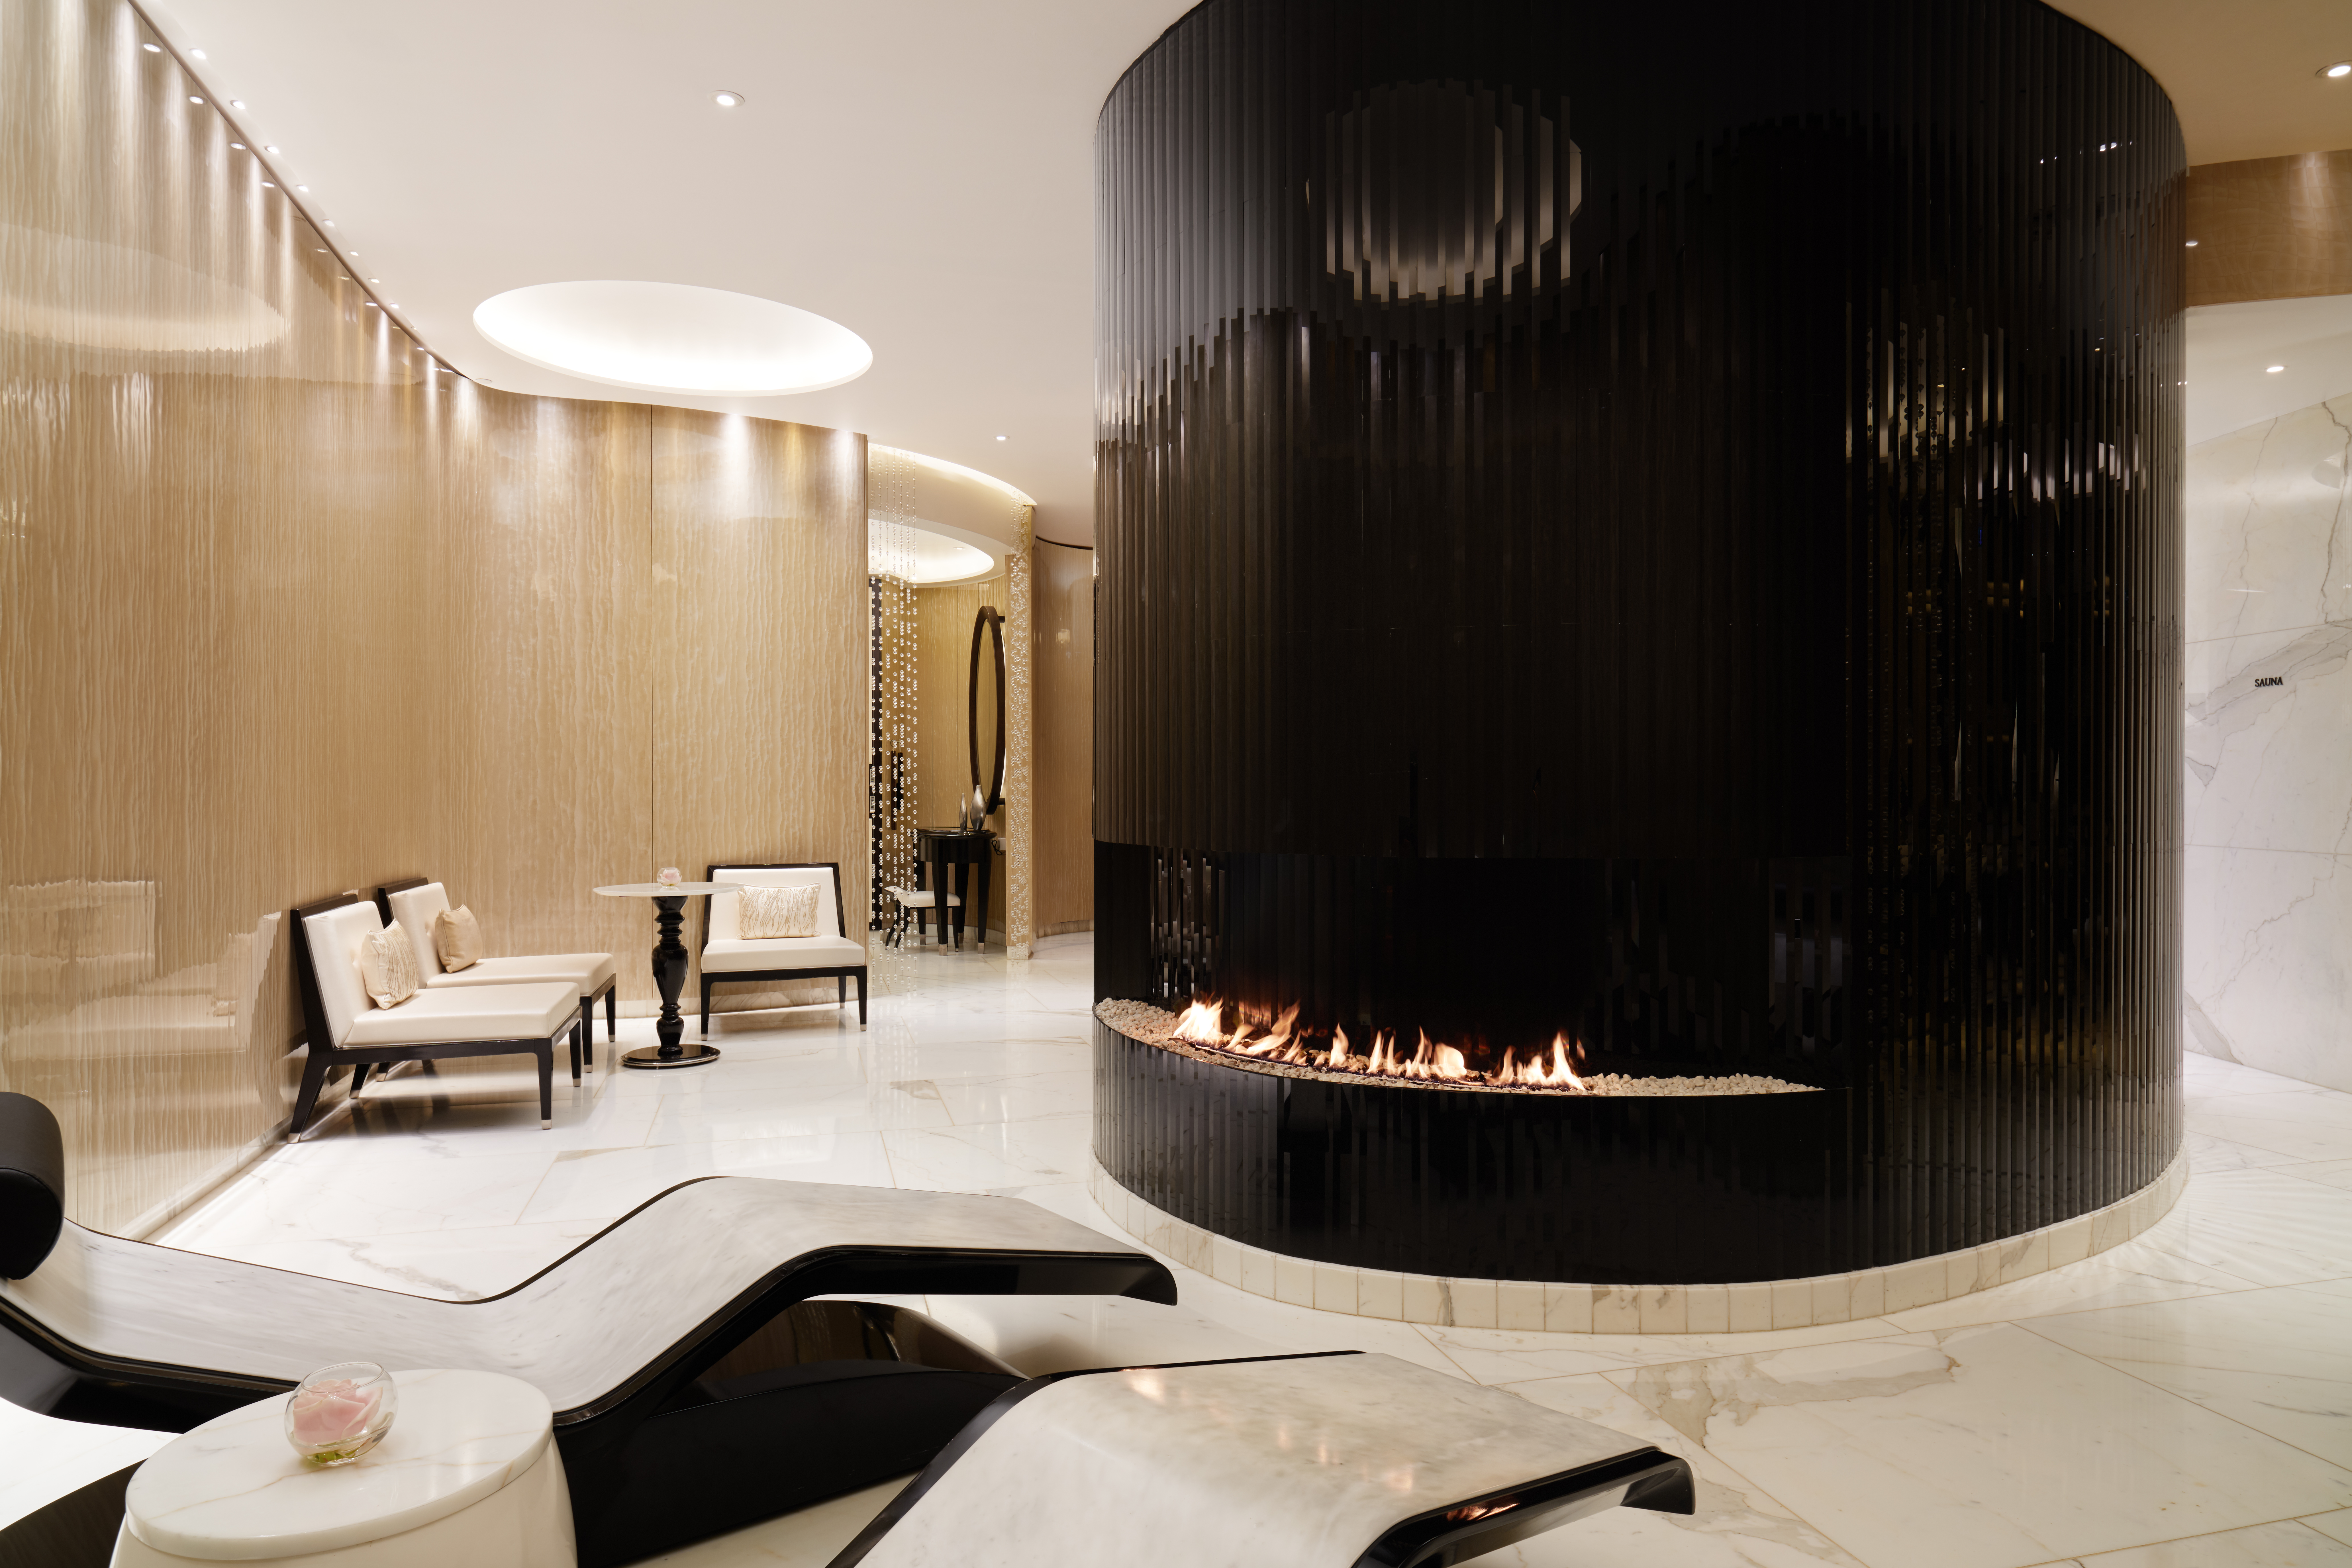 Image of a Bespoke Curved Fireplace Design in Black